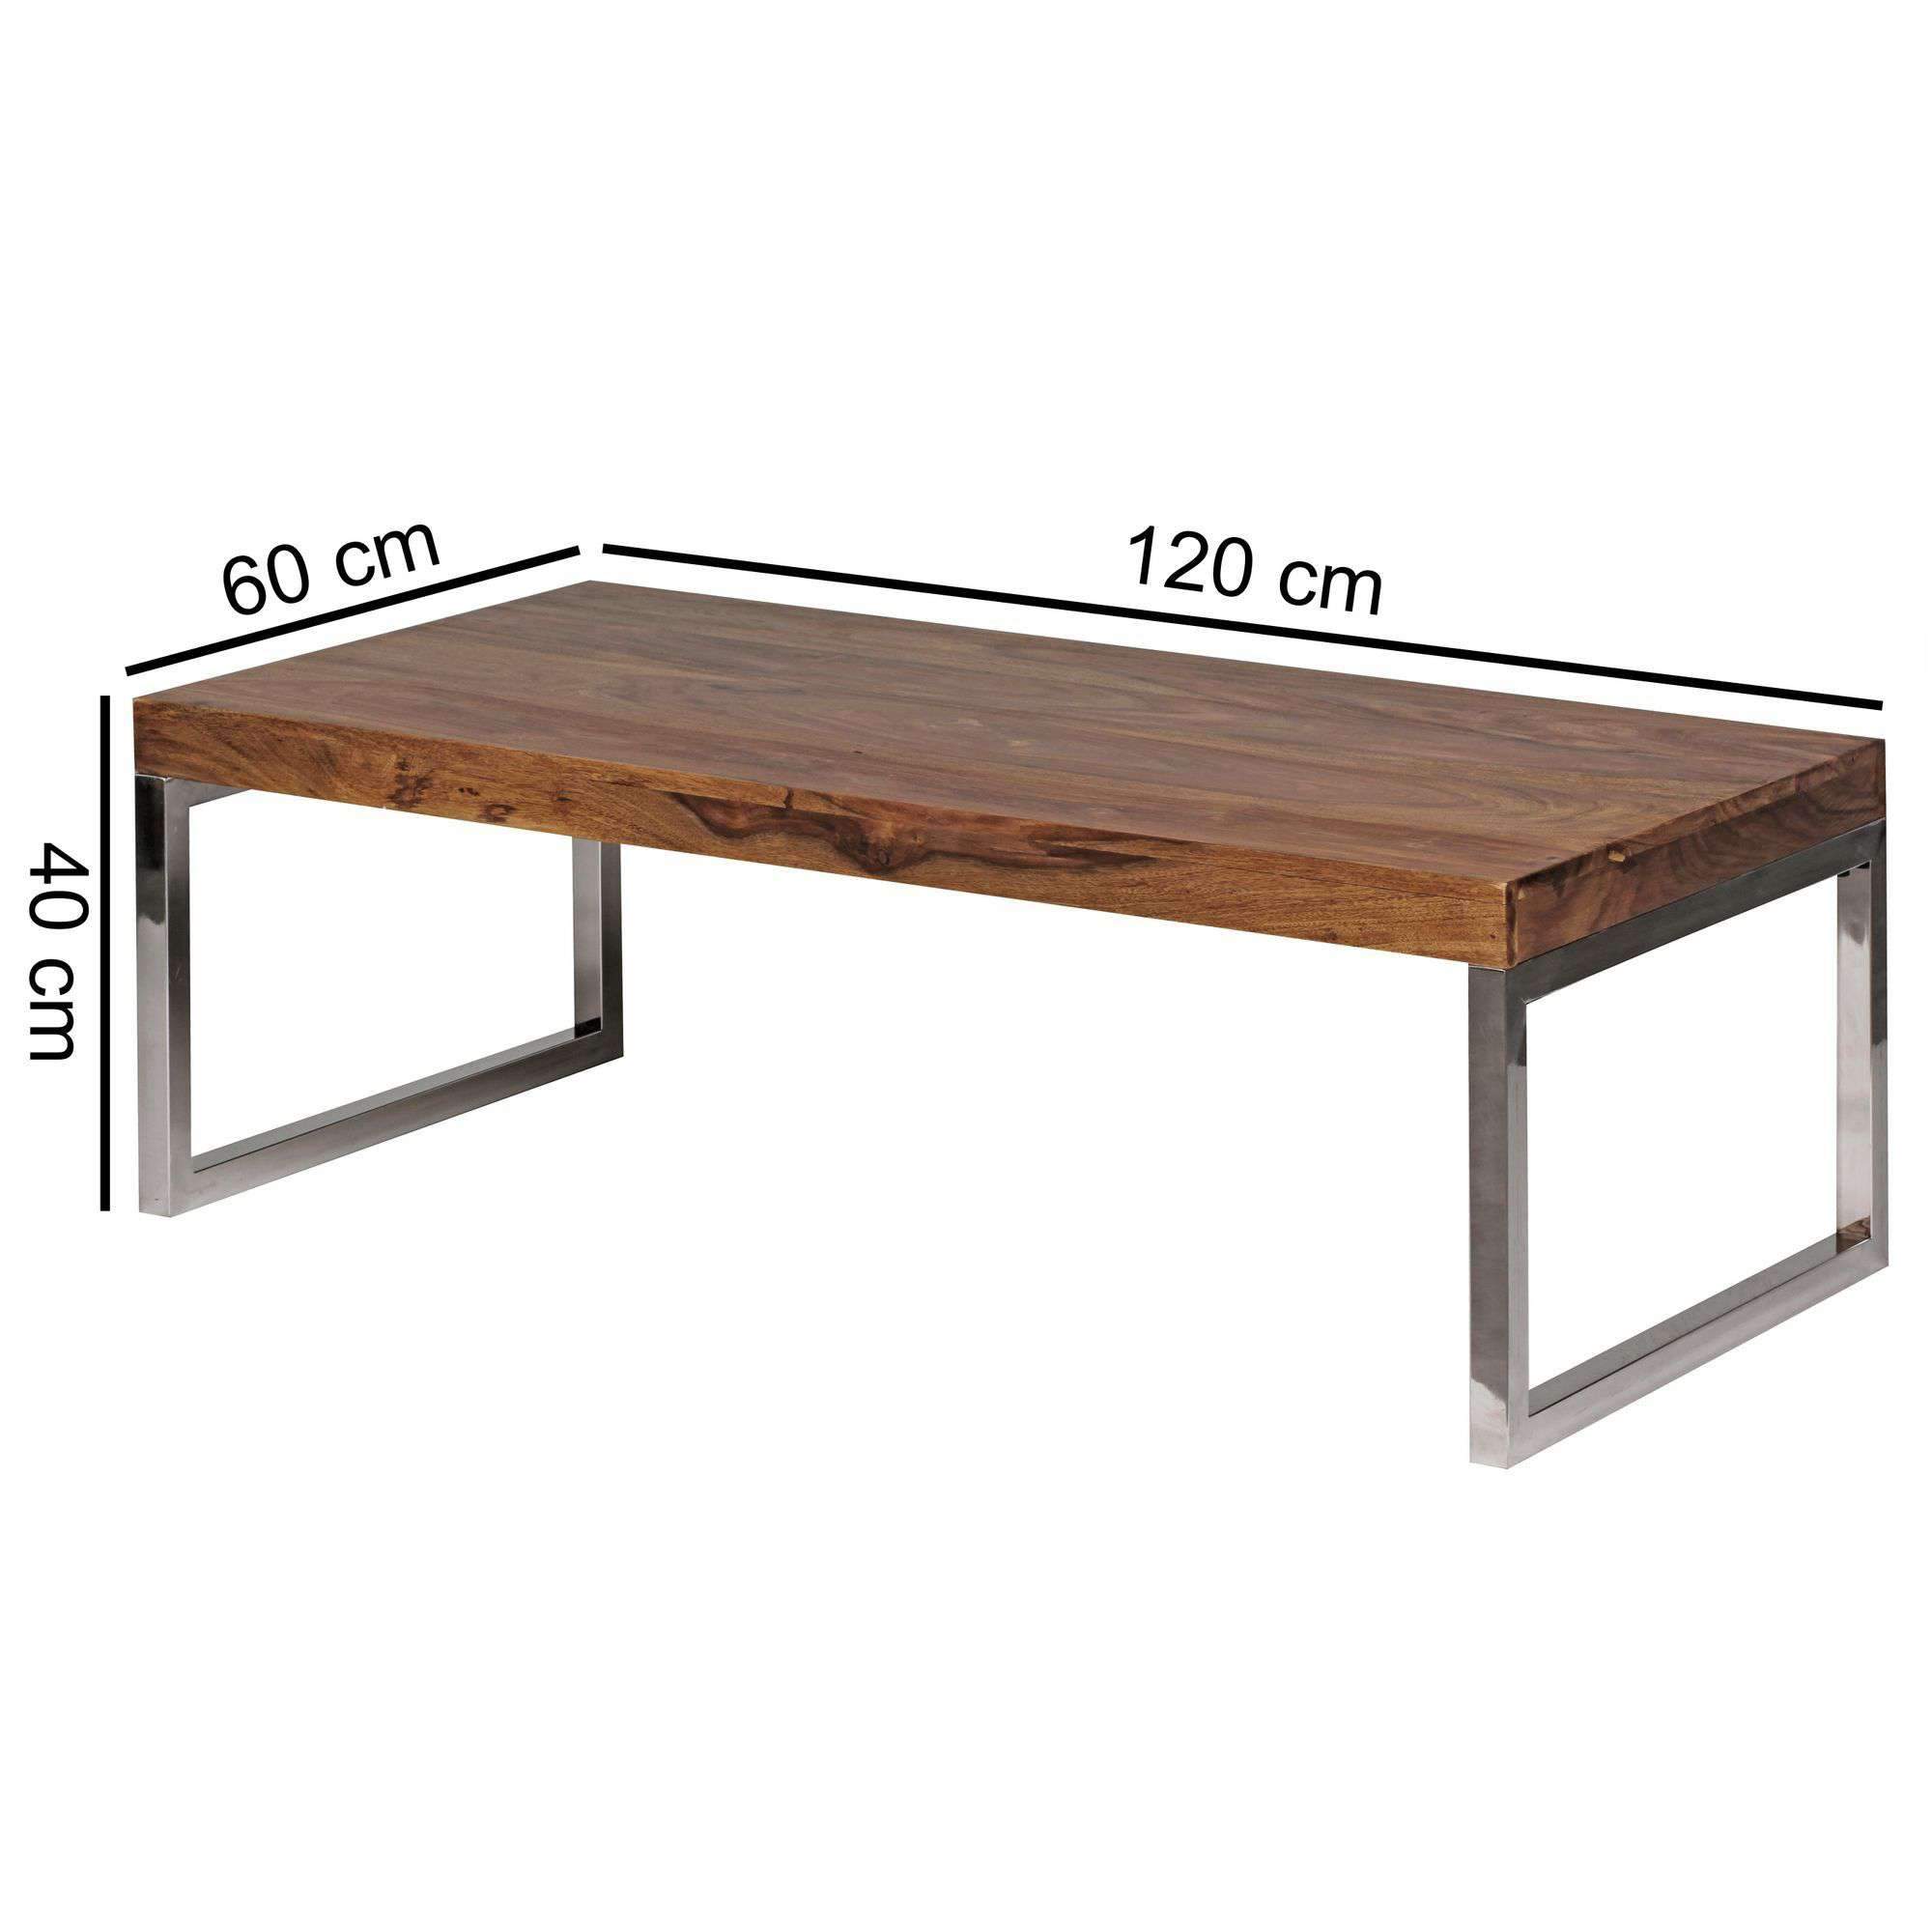 Nancy's Dunning Modern Wooden Coffee Table - Side table - Table - Coffee tables - Table